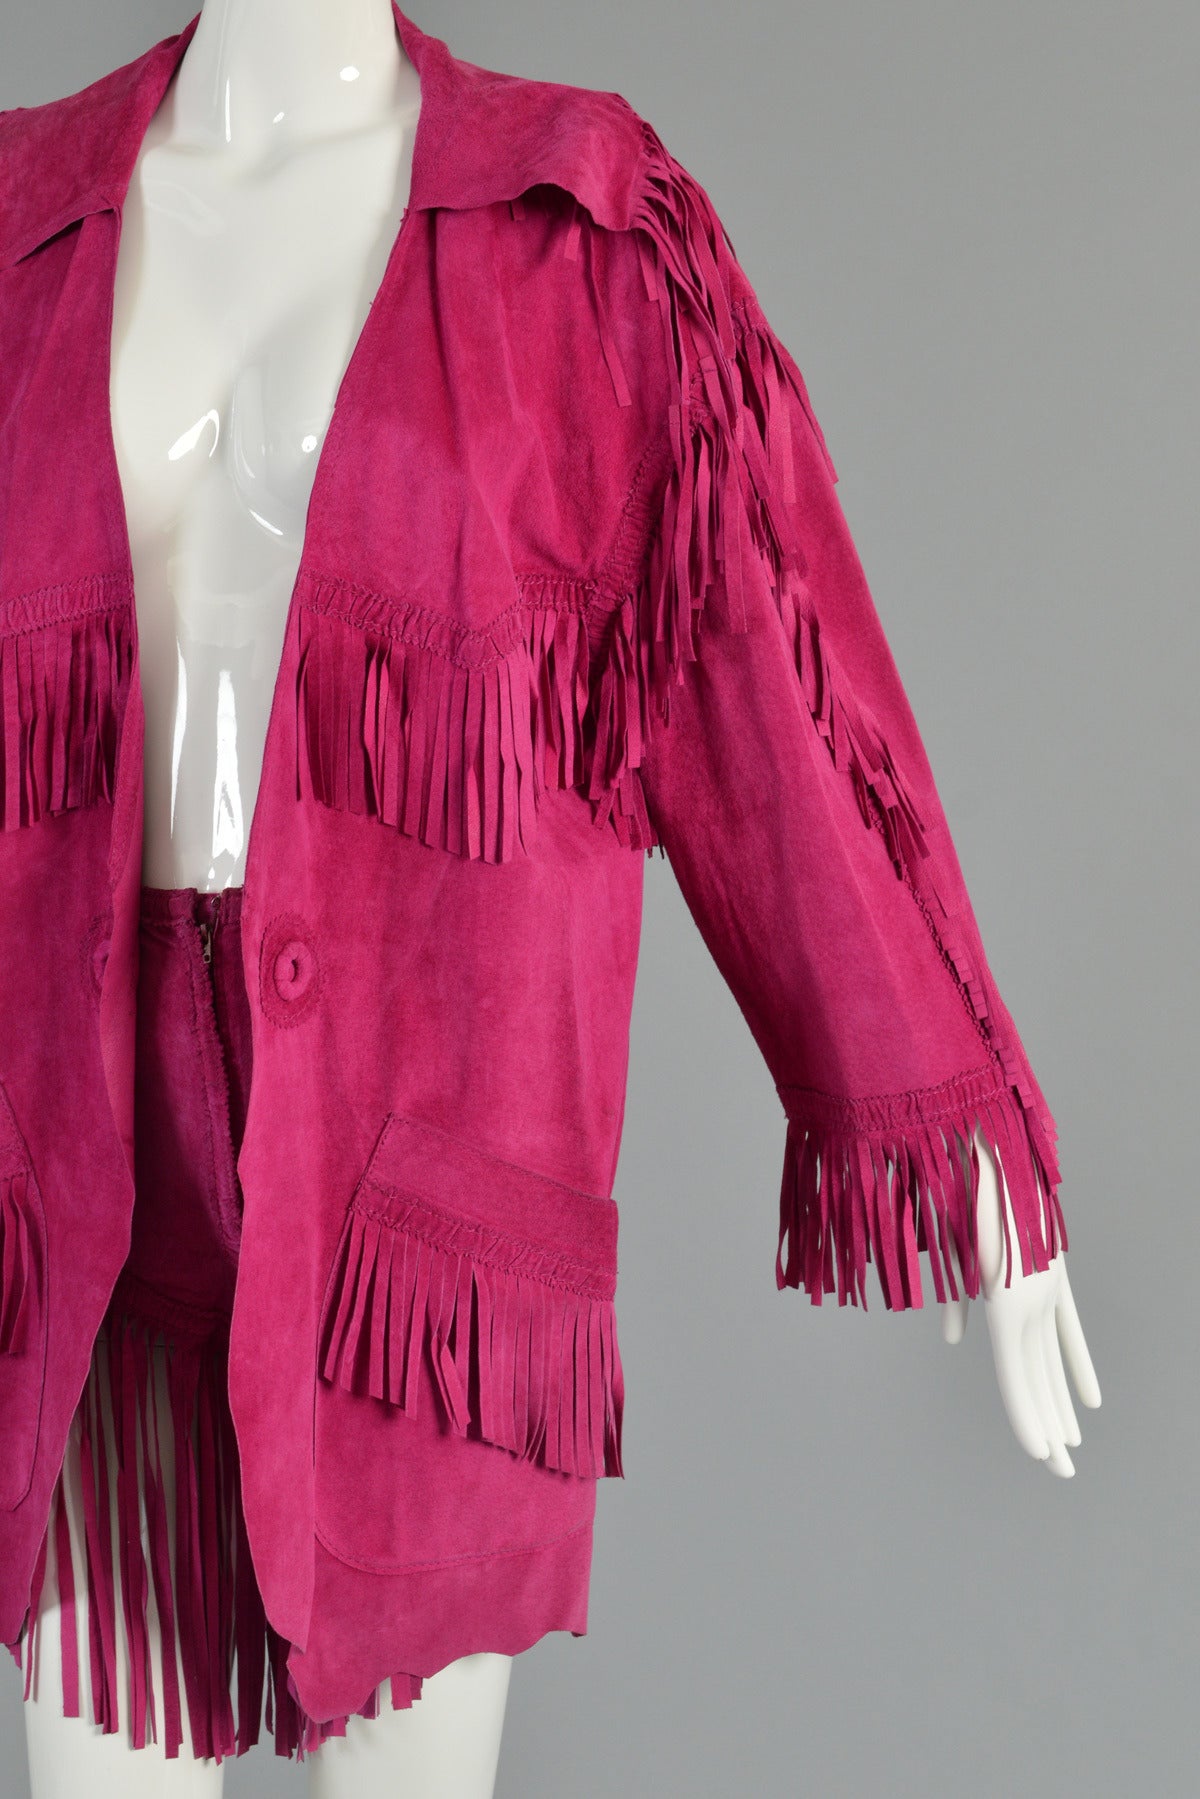 Naomi Campbell Worn Moschino Fringed Suede Jacket + Shorts Set In Excellent Condition For Sale In Yucca Valley, CA